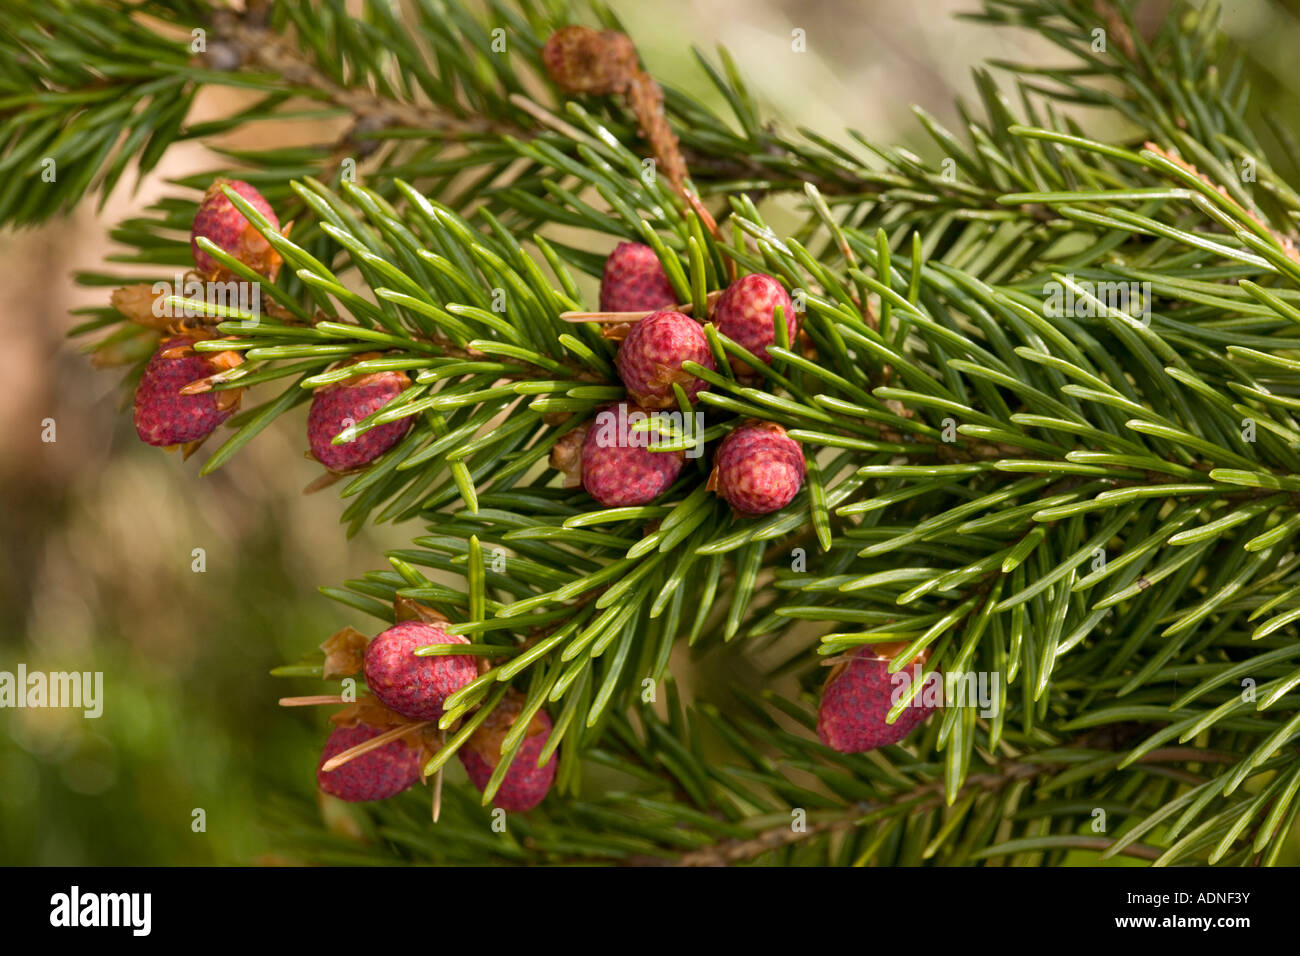 Norway spruce Picea abies in flower Sweden Stock Photo